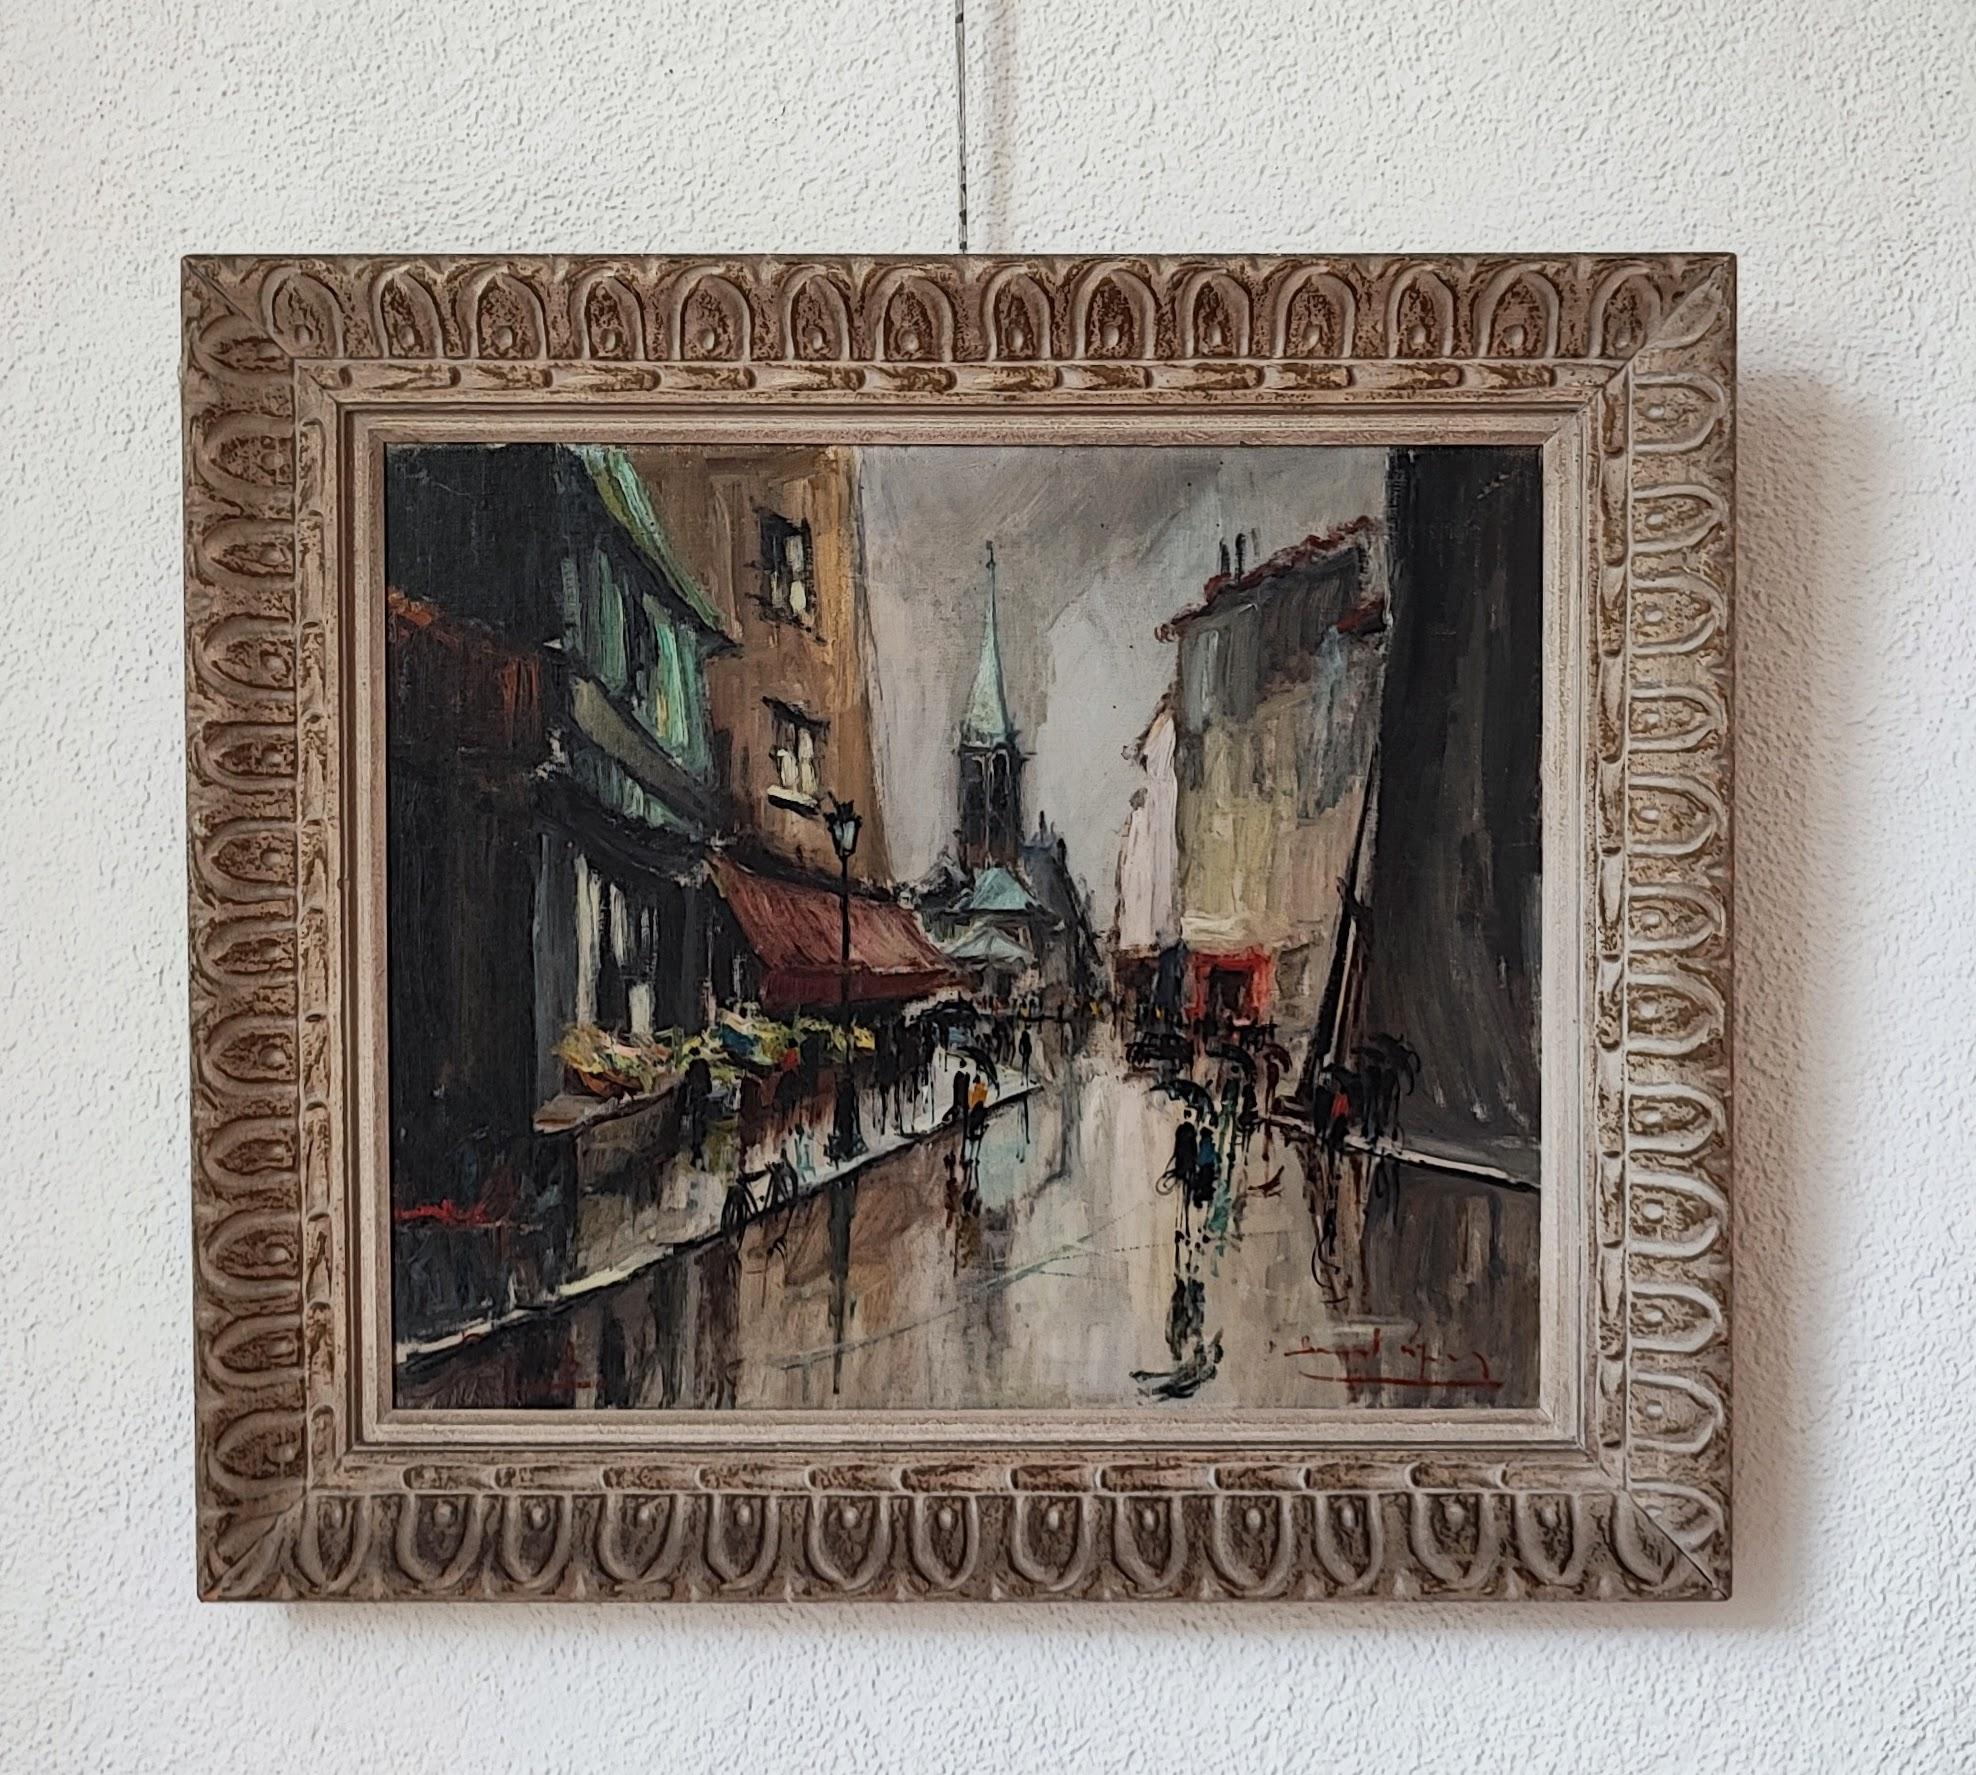 Busy market street on a rainy day - Painting by Bernard Lignon